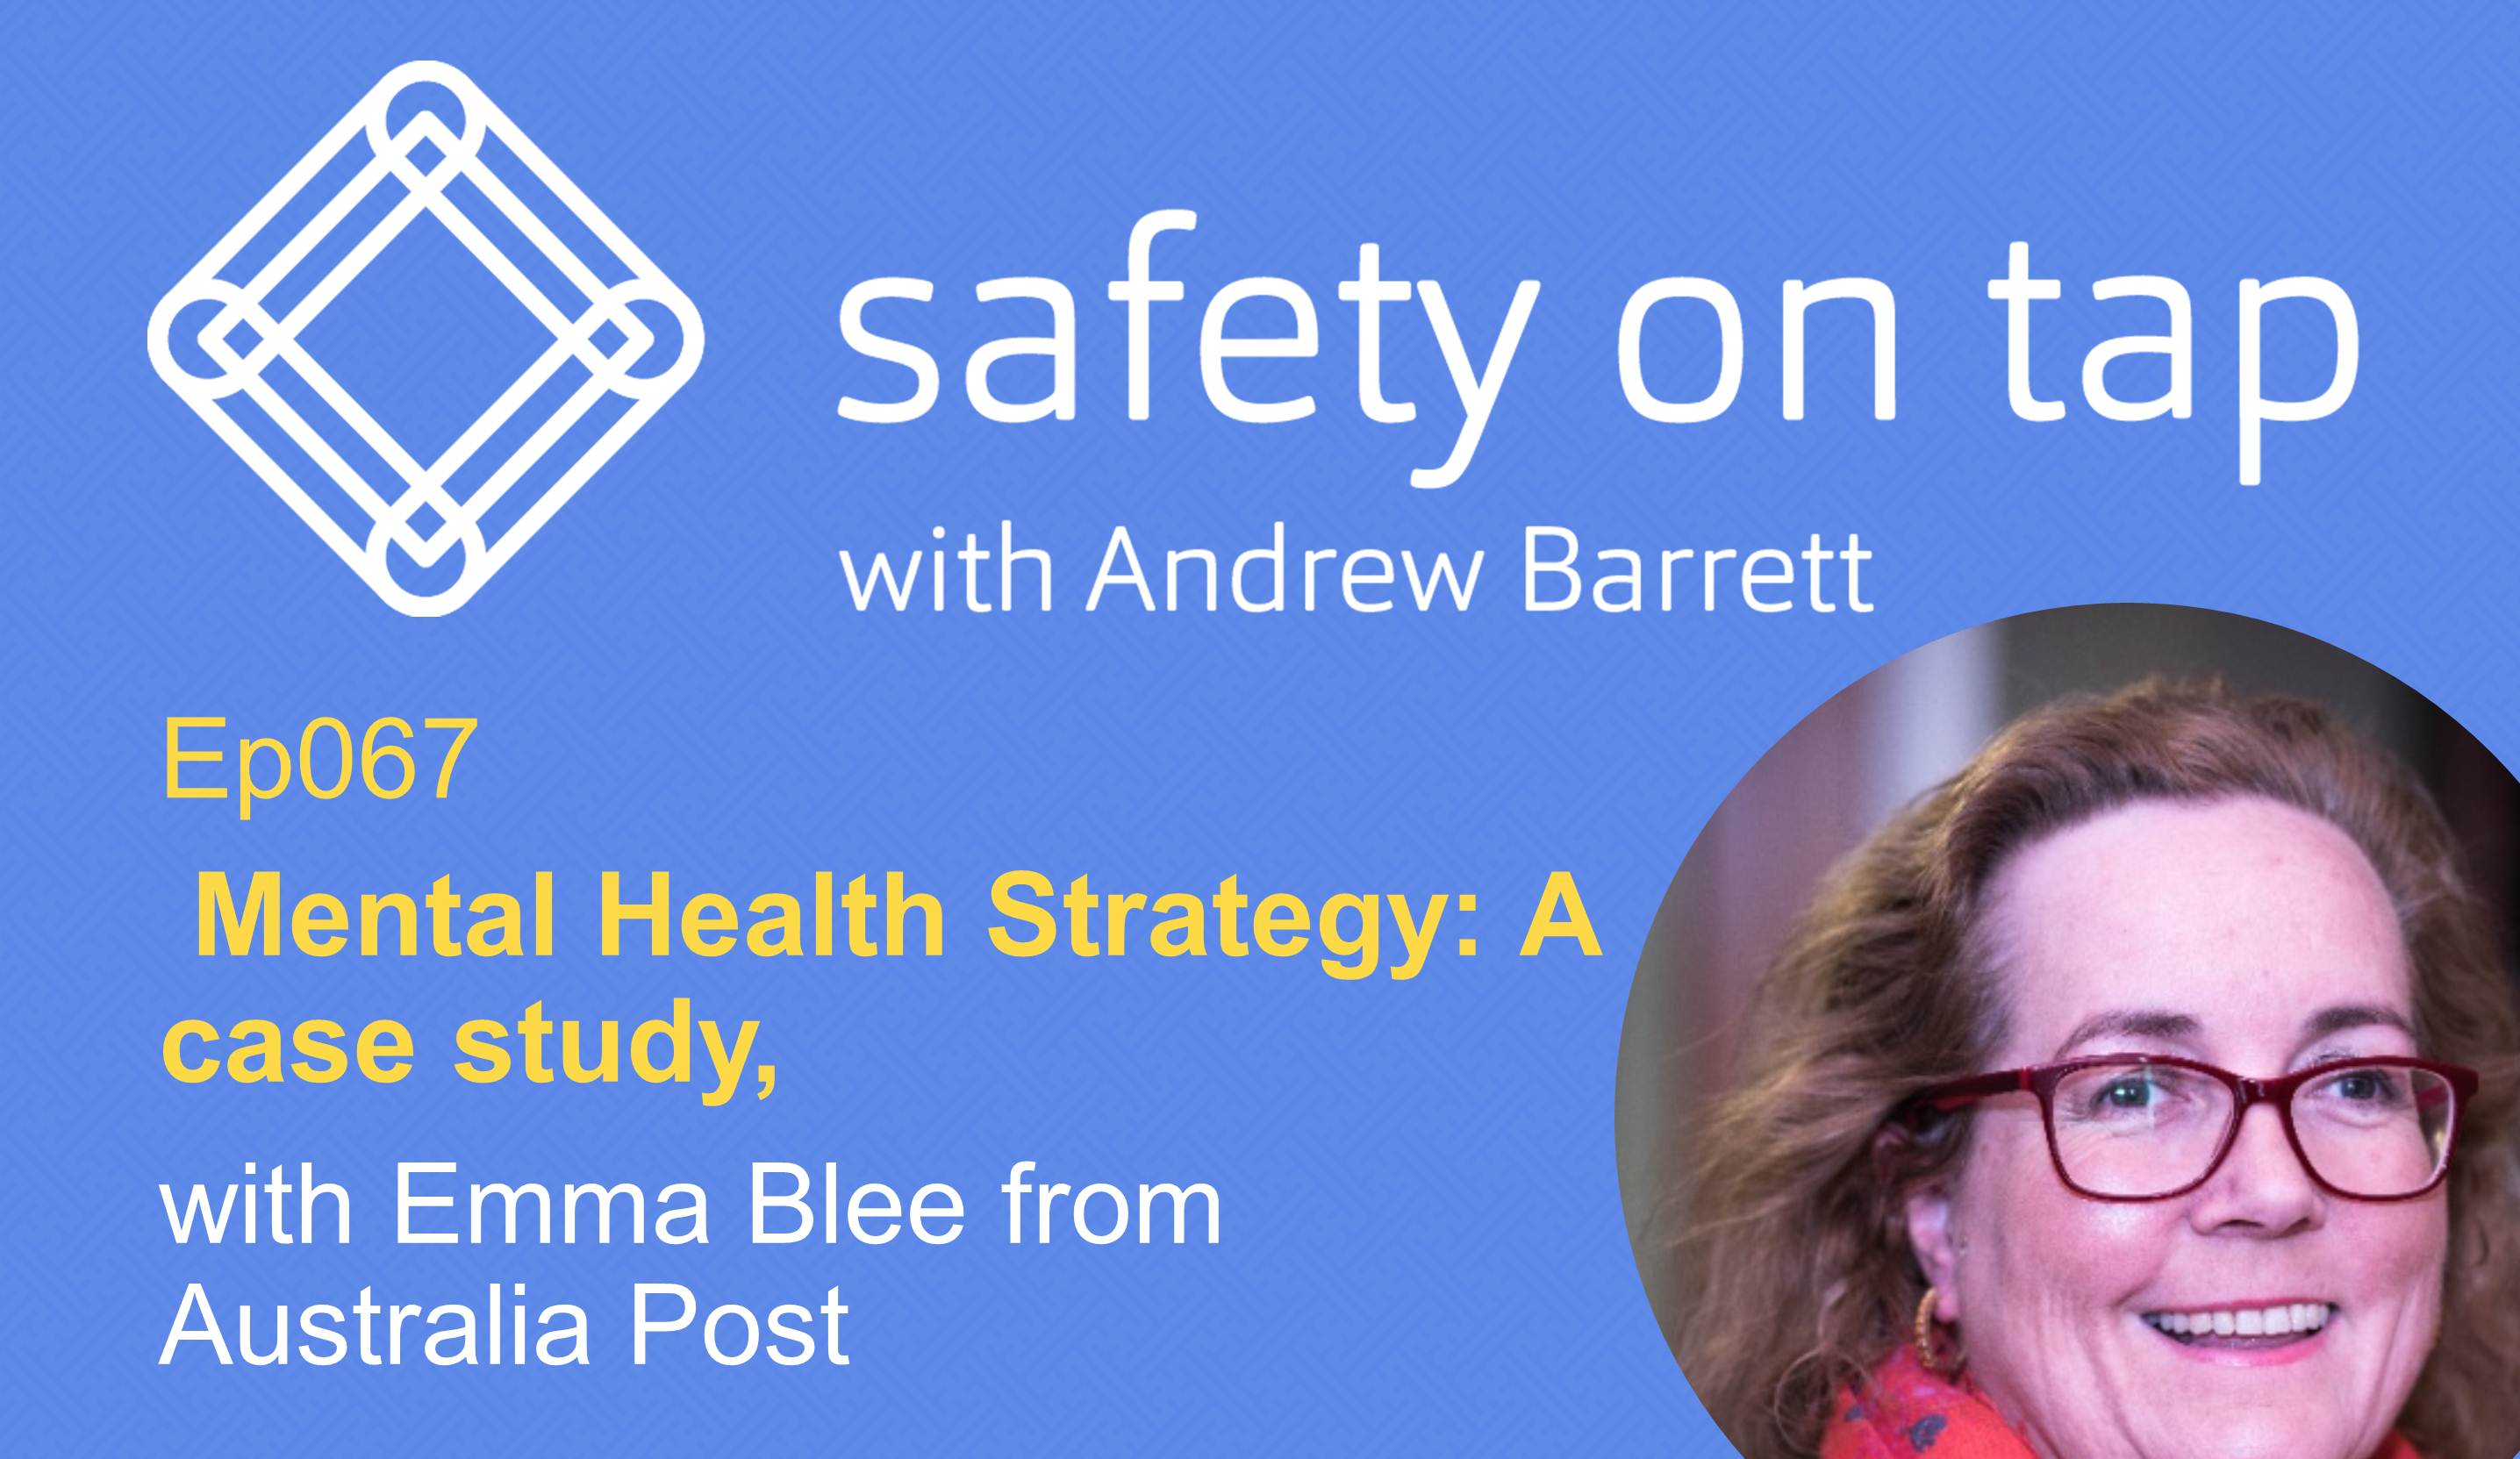 “Ep067: Mental Health Strategy: A case study, with Emma Blee from Australia Post”